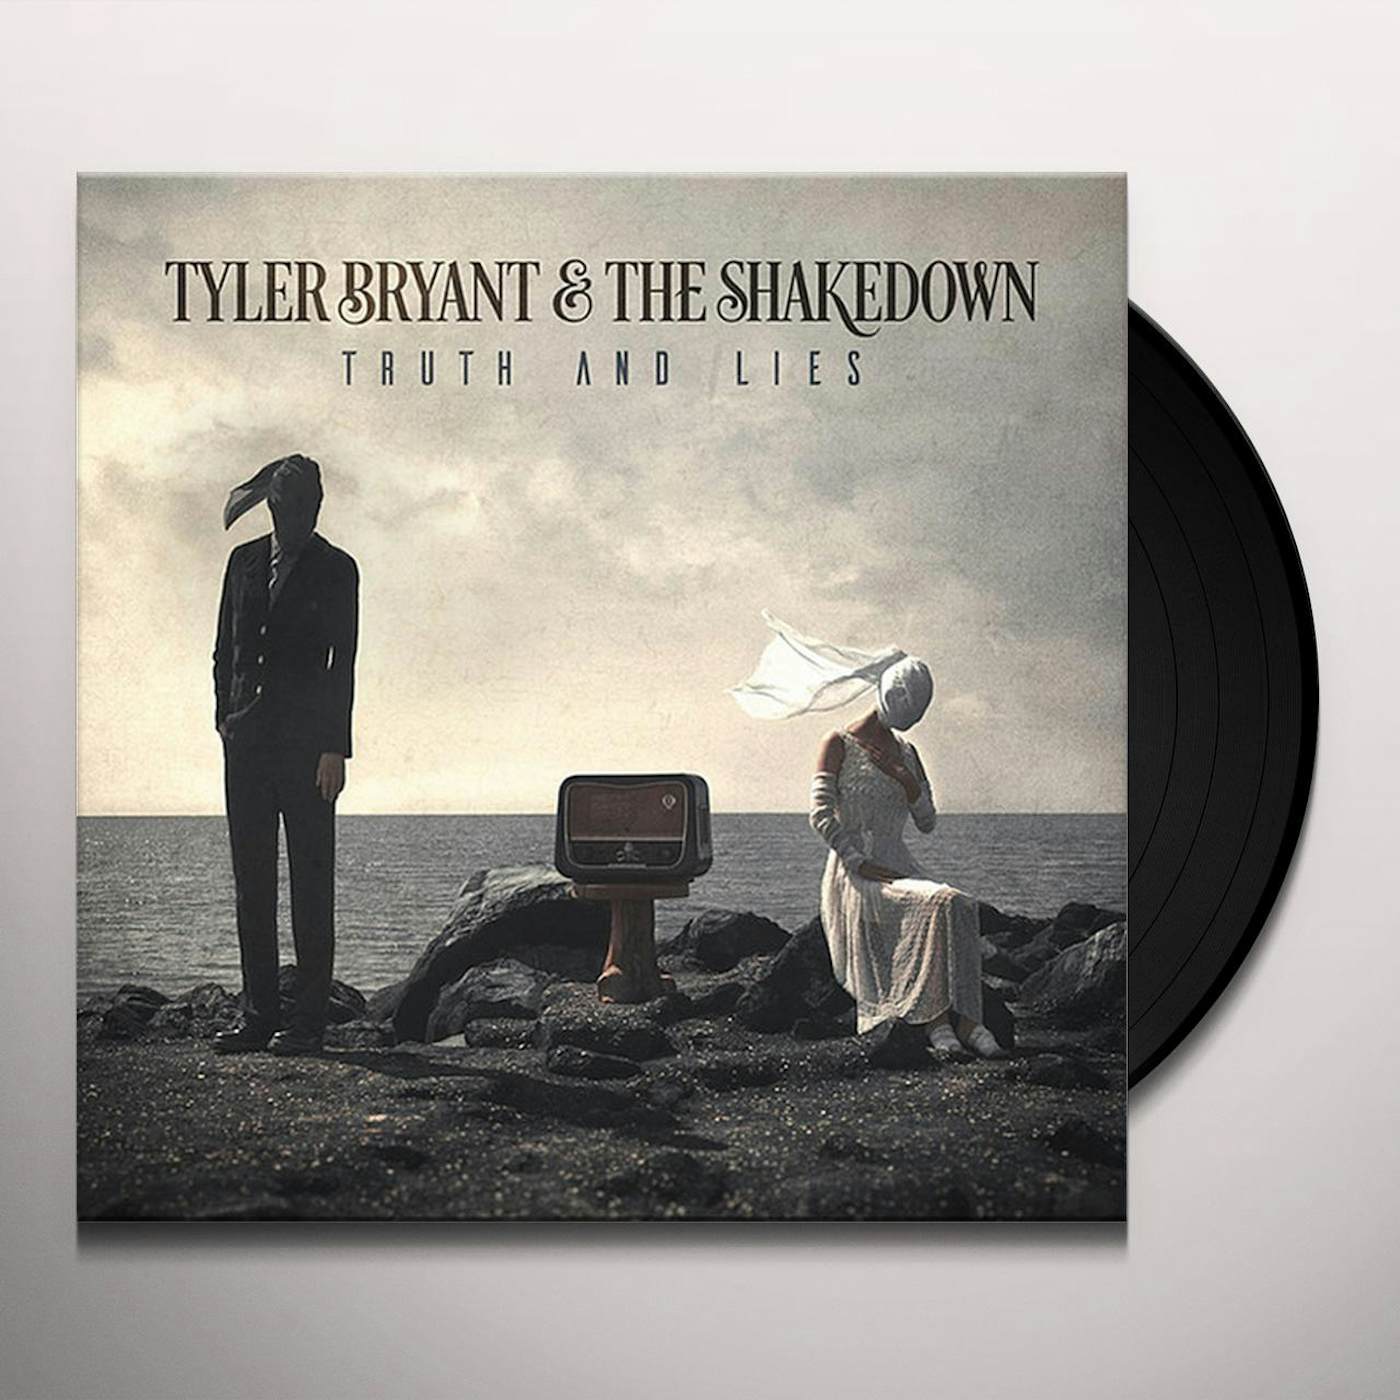 Tyler Bryant & the Shakedown Truth And Lies Vinyl Record